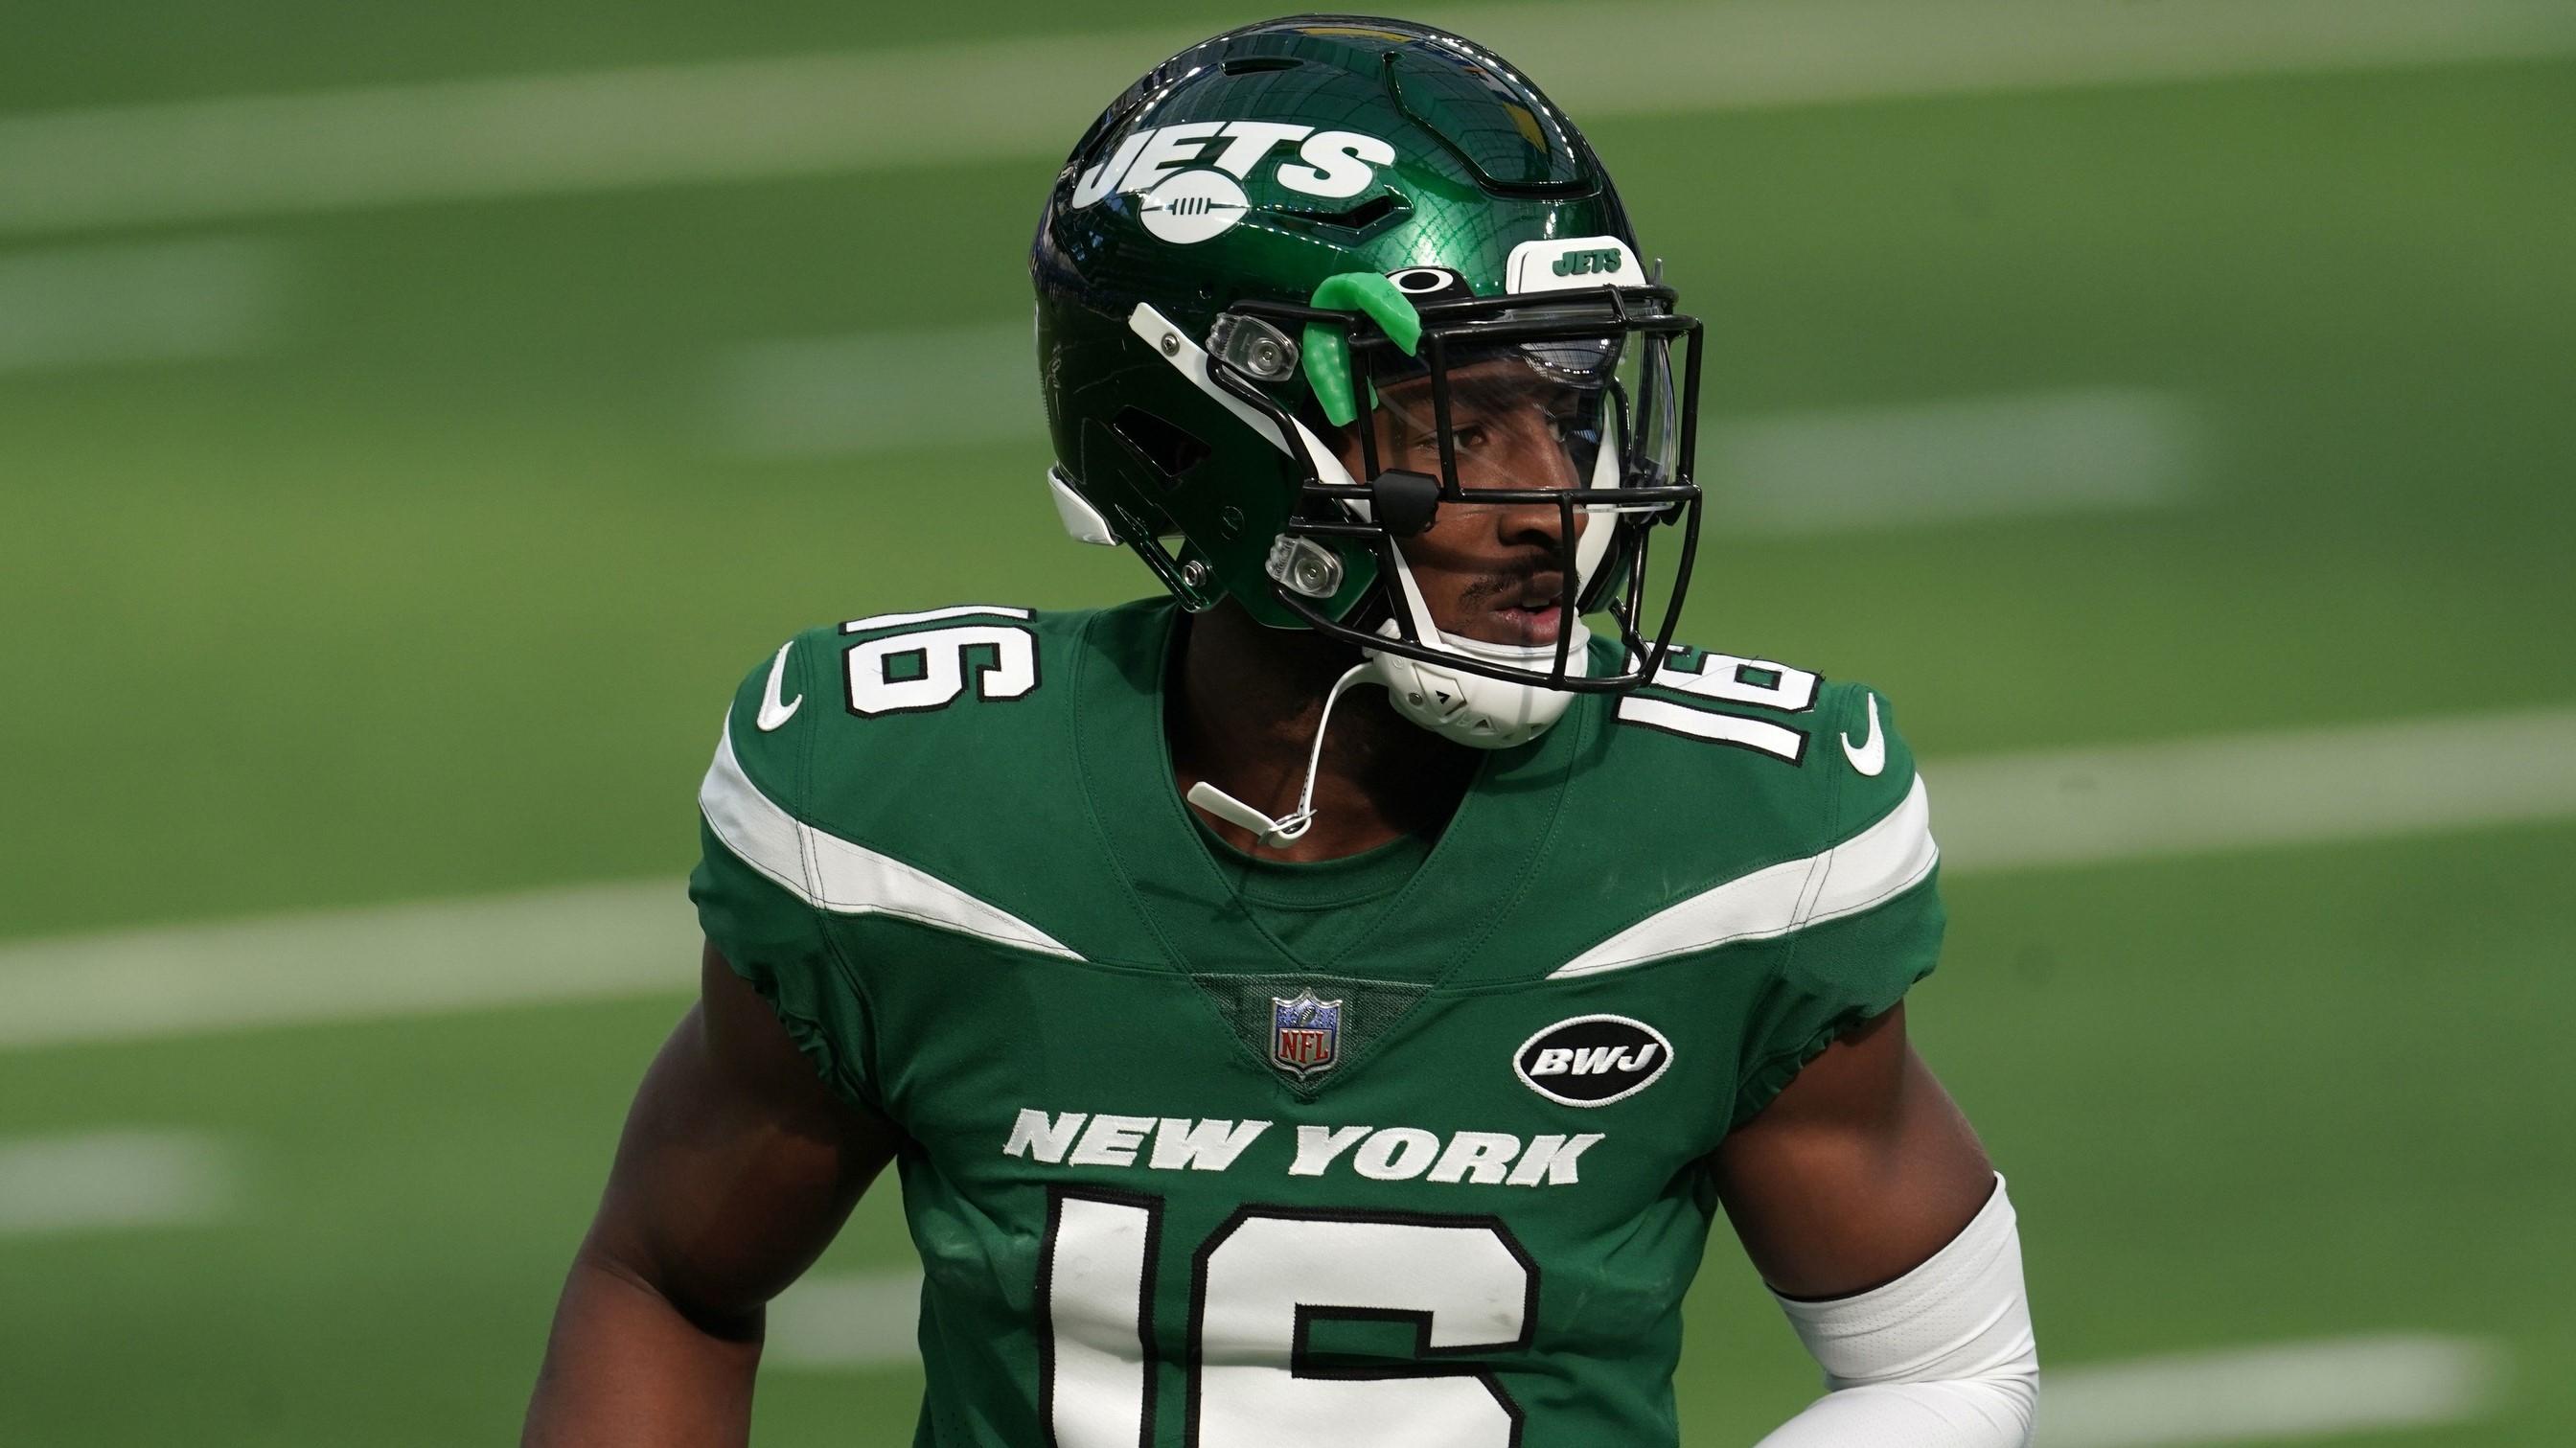 Dec 20, 2020; Inglewood, California, USA; New York Jets wide receiver Jeff Smith (16) before the game against the Los Angeles Rams at SoFi Stadium. The Jets defeated the Rams 23-20. / Kirby Lee-USA TODAY Sports